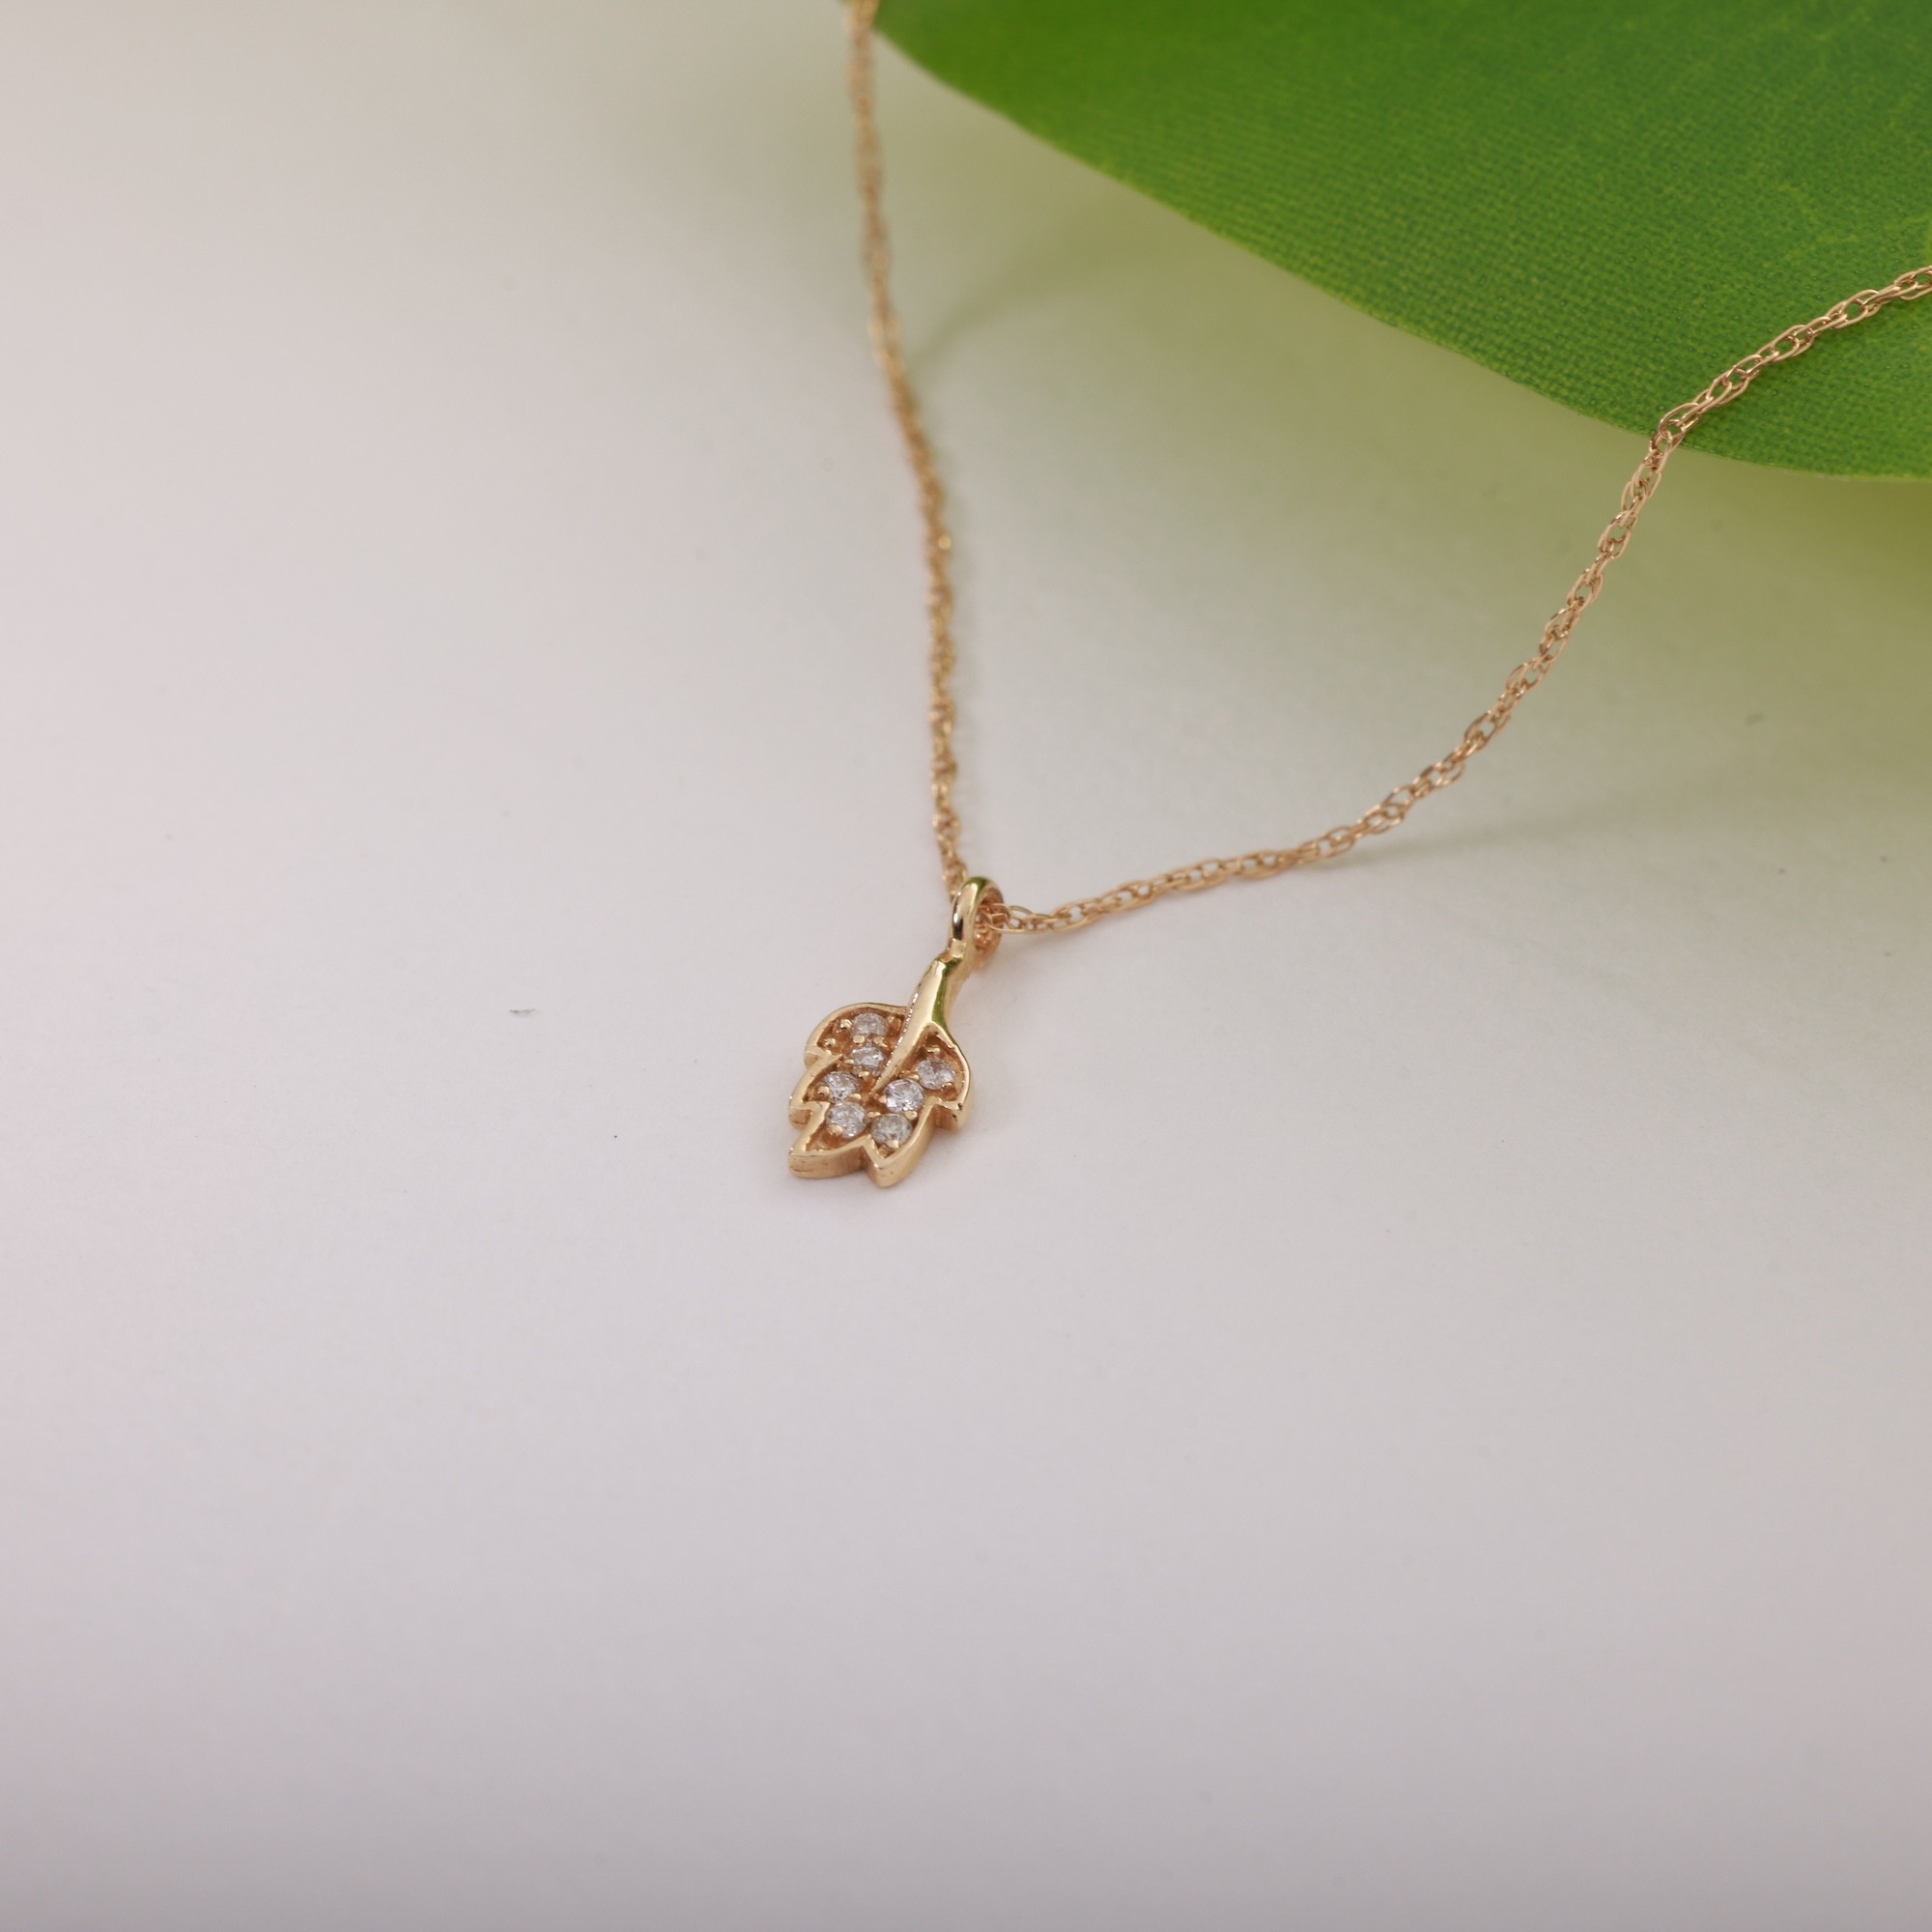 Minimal Leaf Necklace with 14 Carat Gold Stone